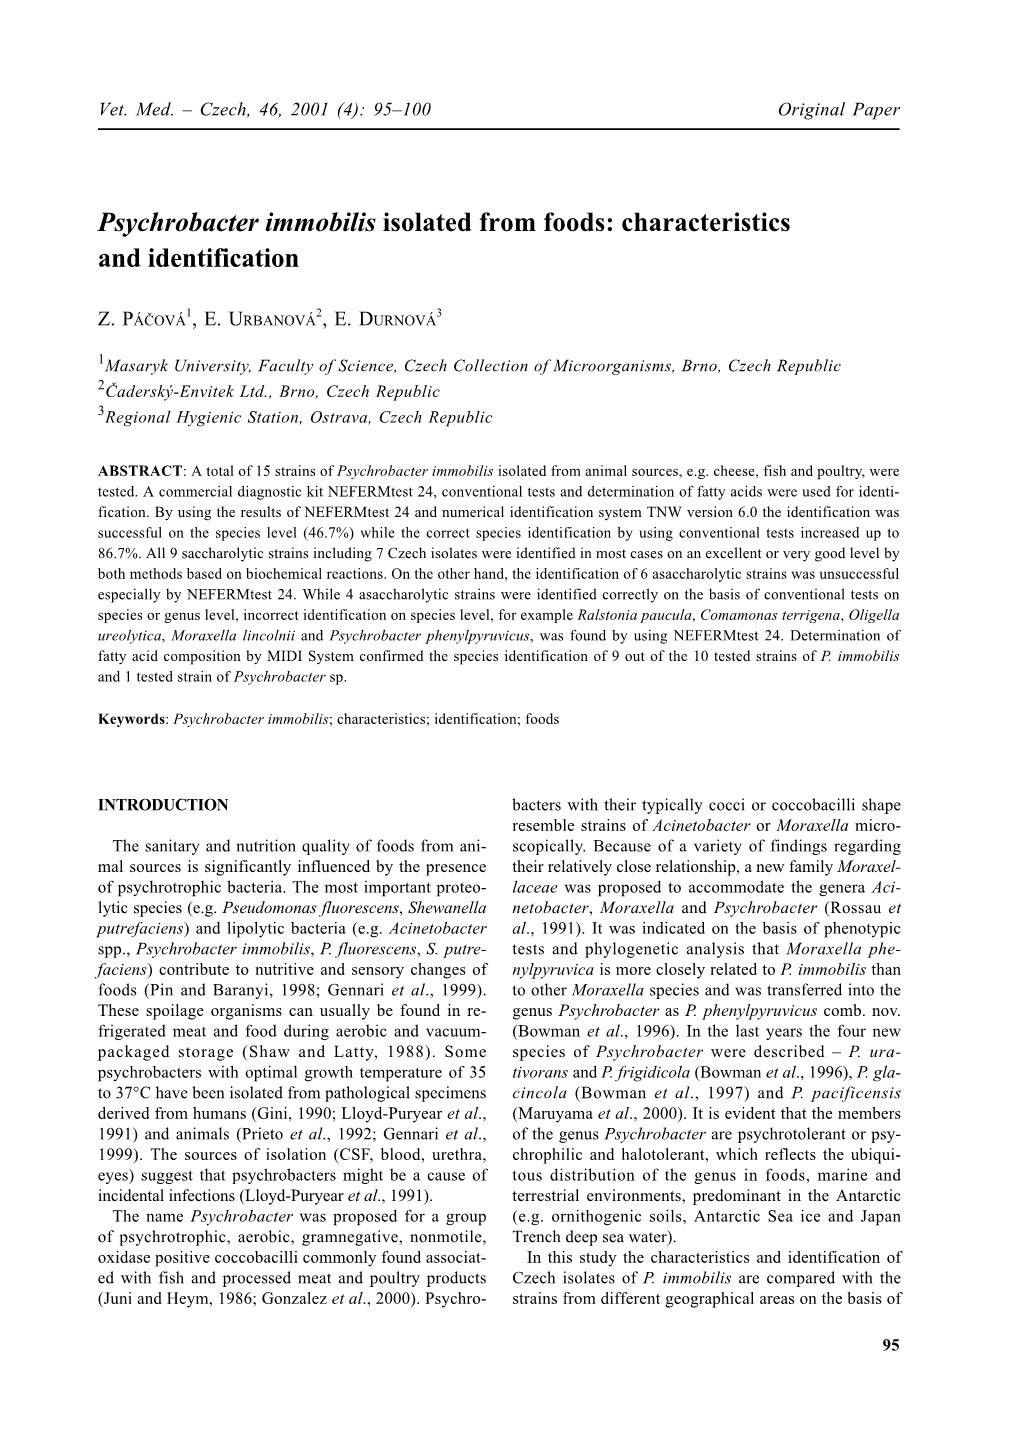 Psychrobacter Immobilis Isolated from Foods: Characteristics and Identification